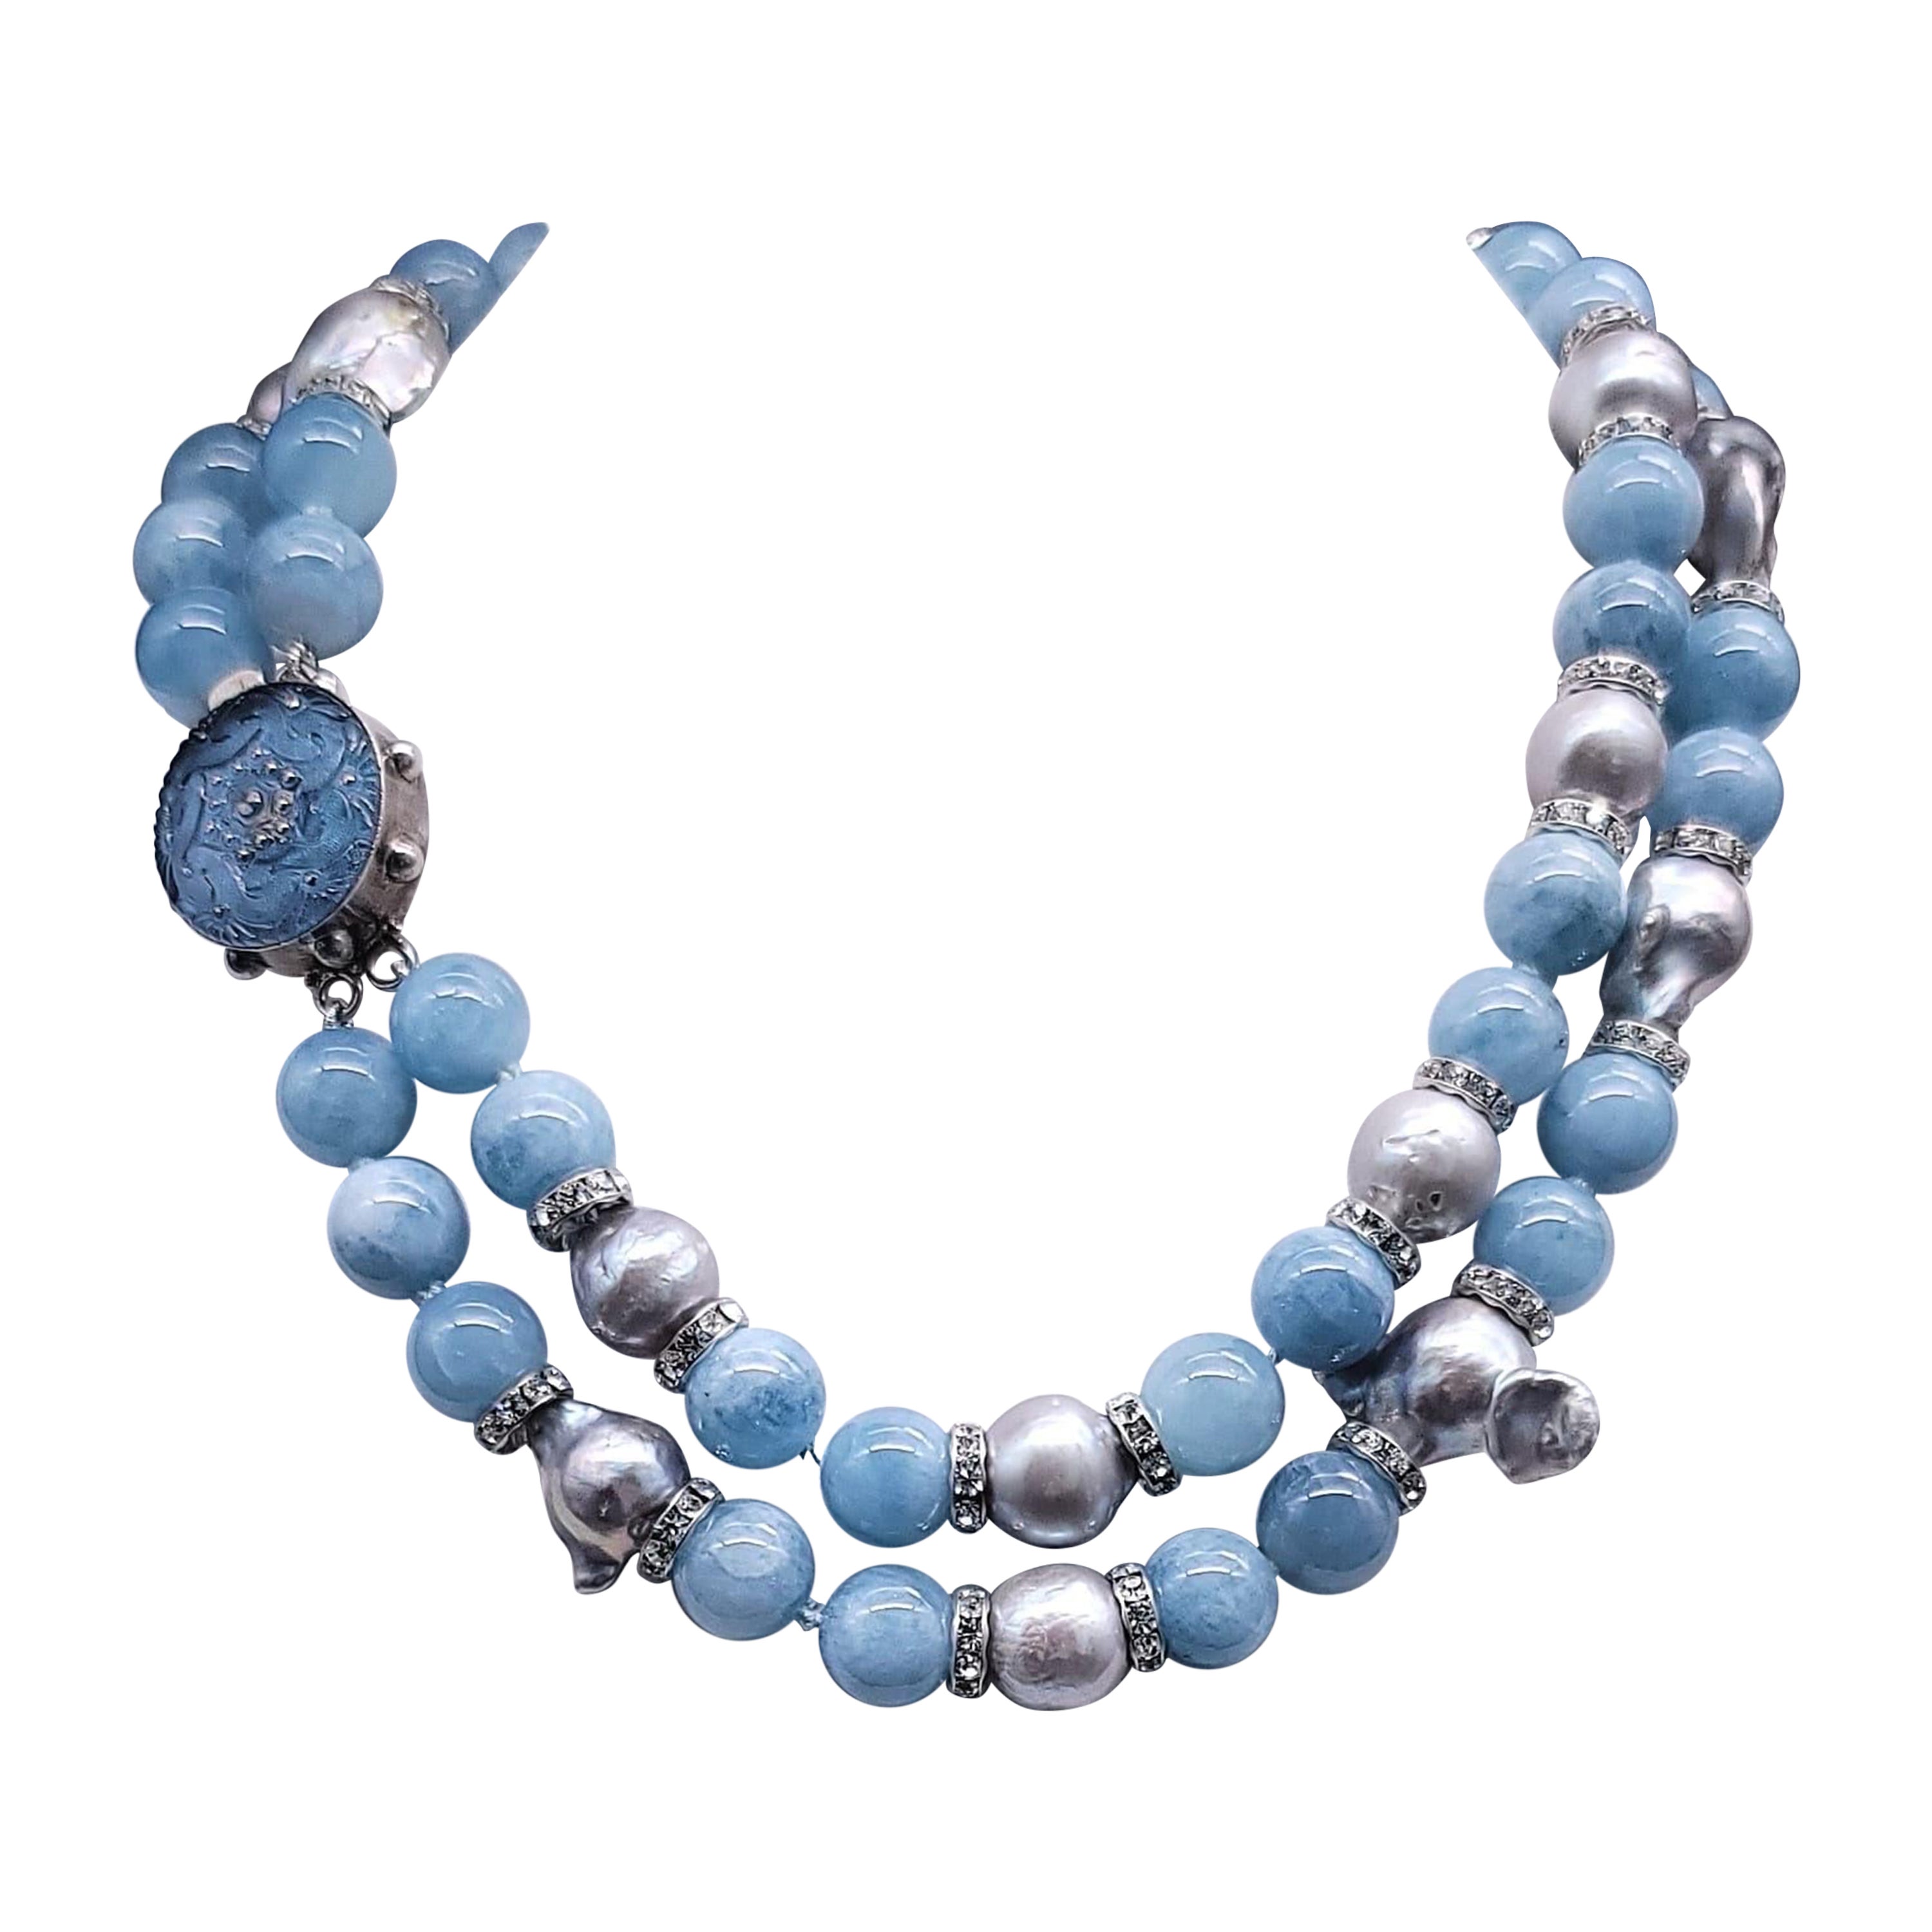 A.Jeschel Aquamarine and Baroque Grey Pearls necklace. For Sale